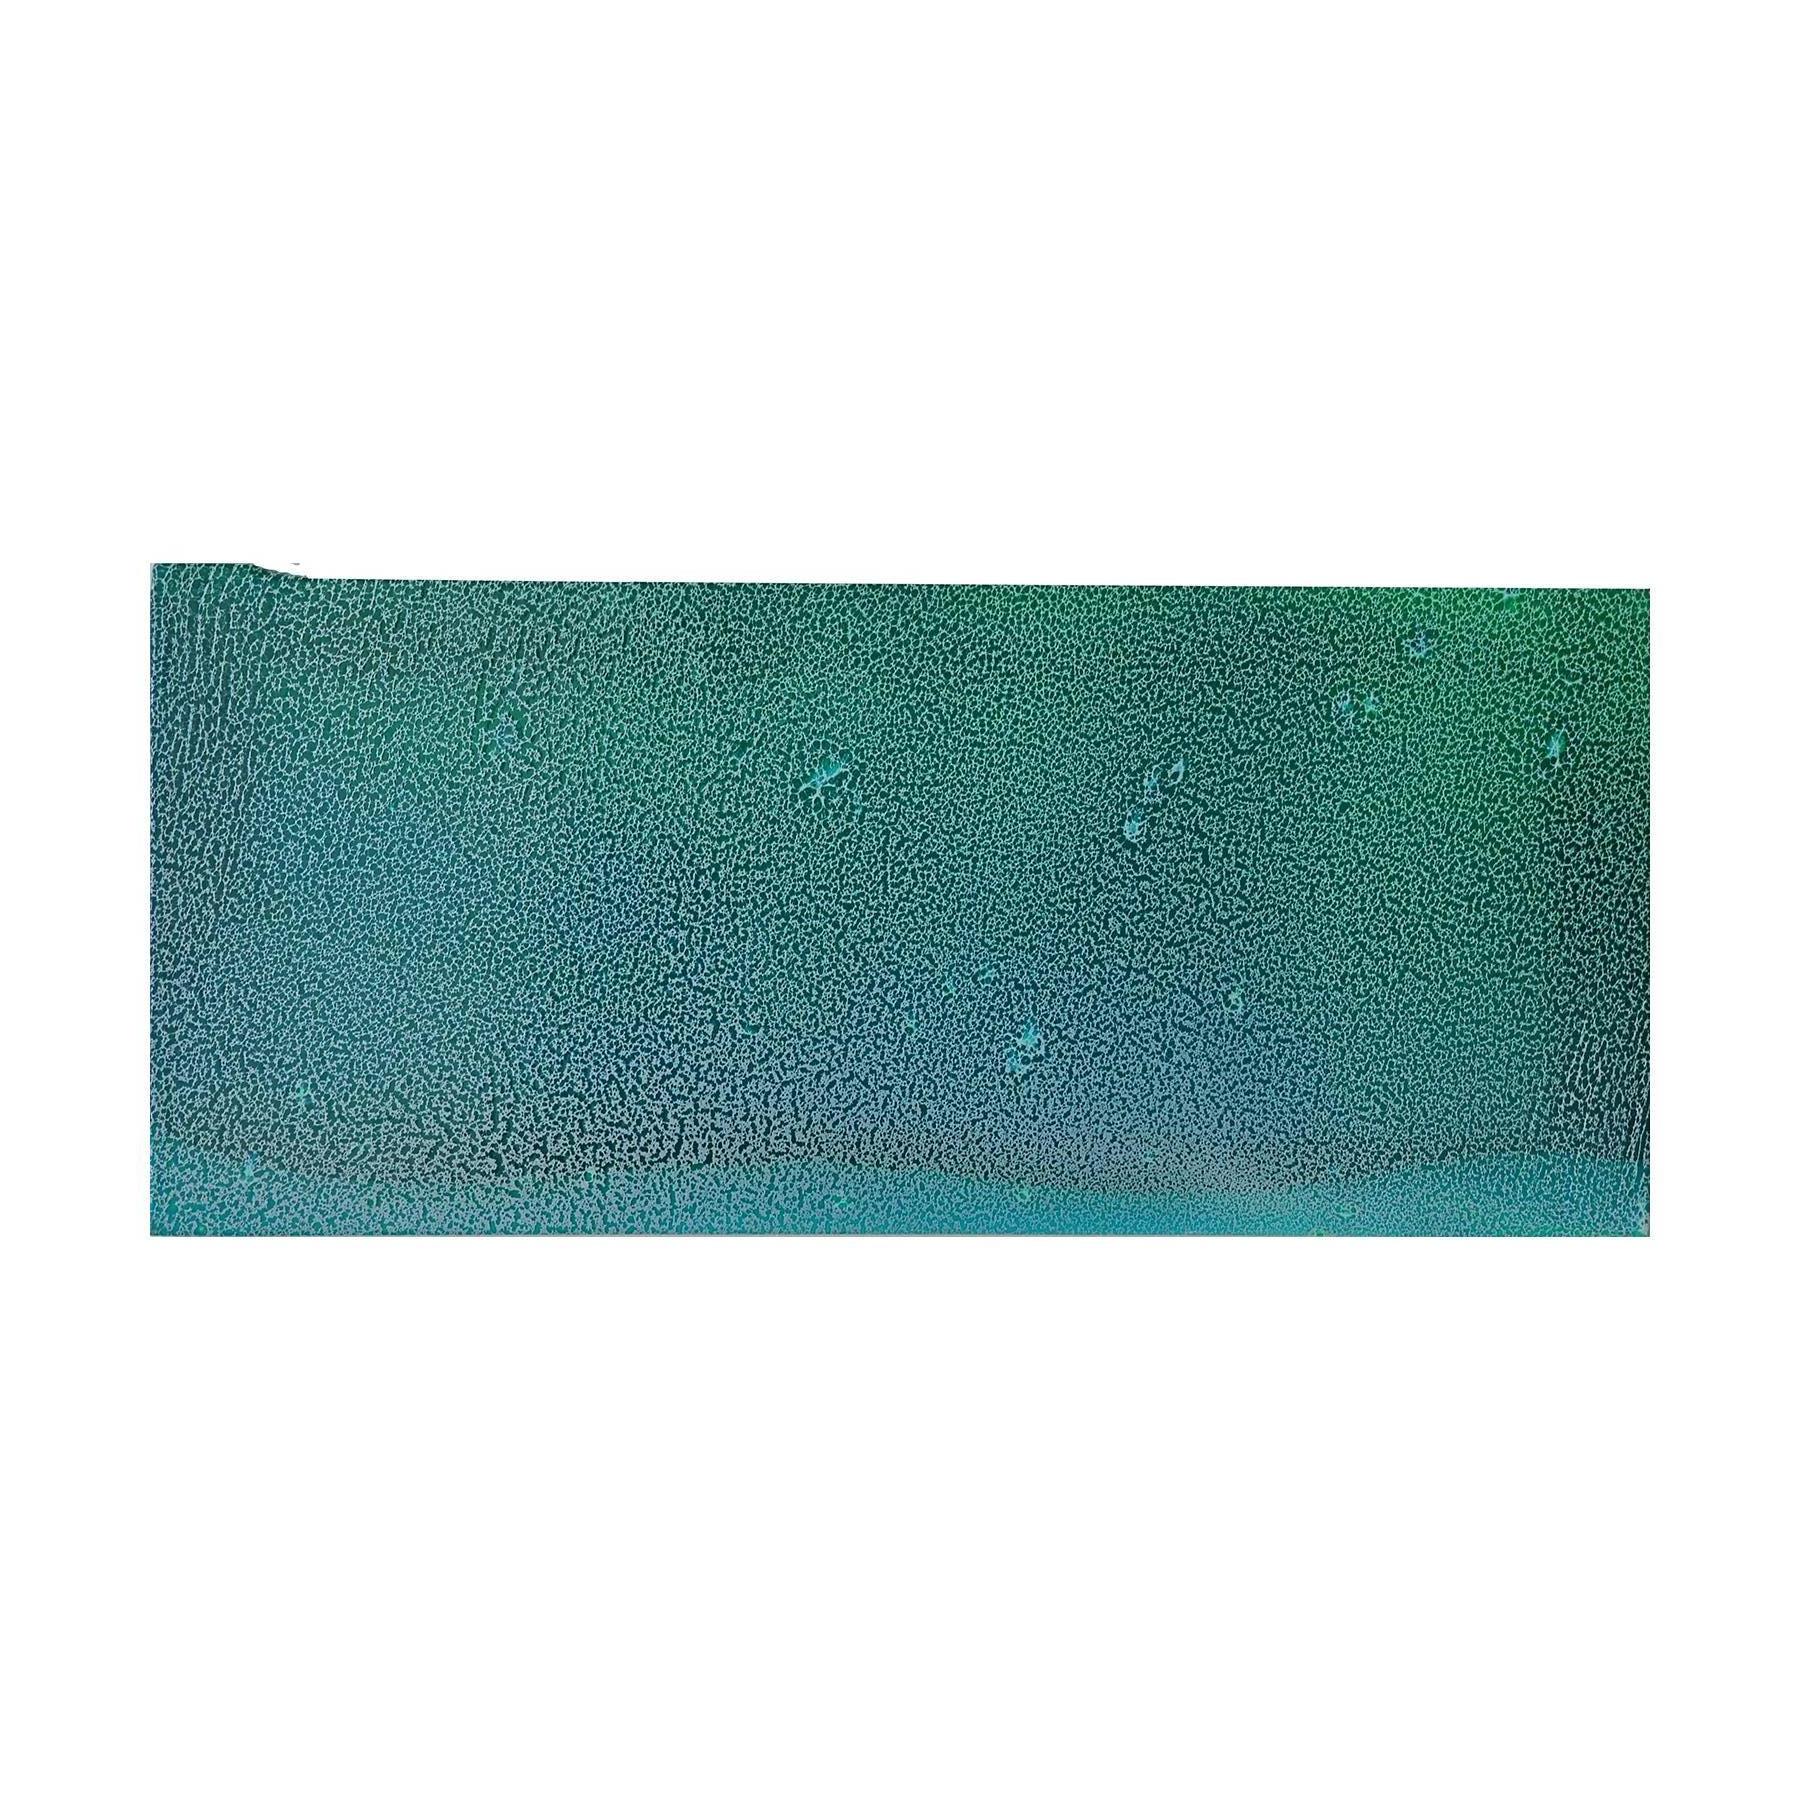 Abstract Mixed Media Blue and Green Resin Piece - Mixed Media Art by Unknown